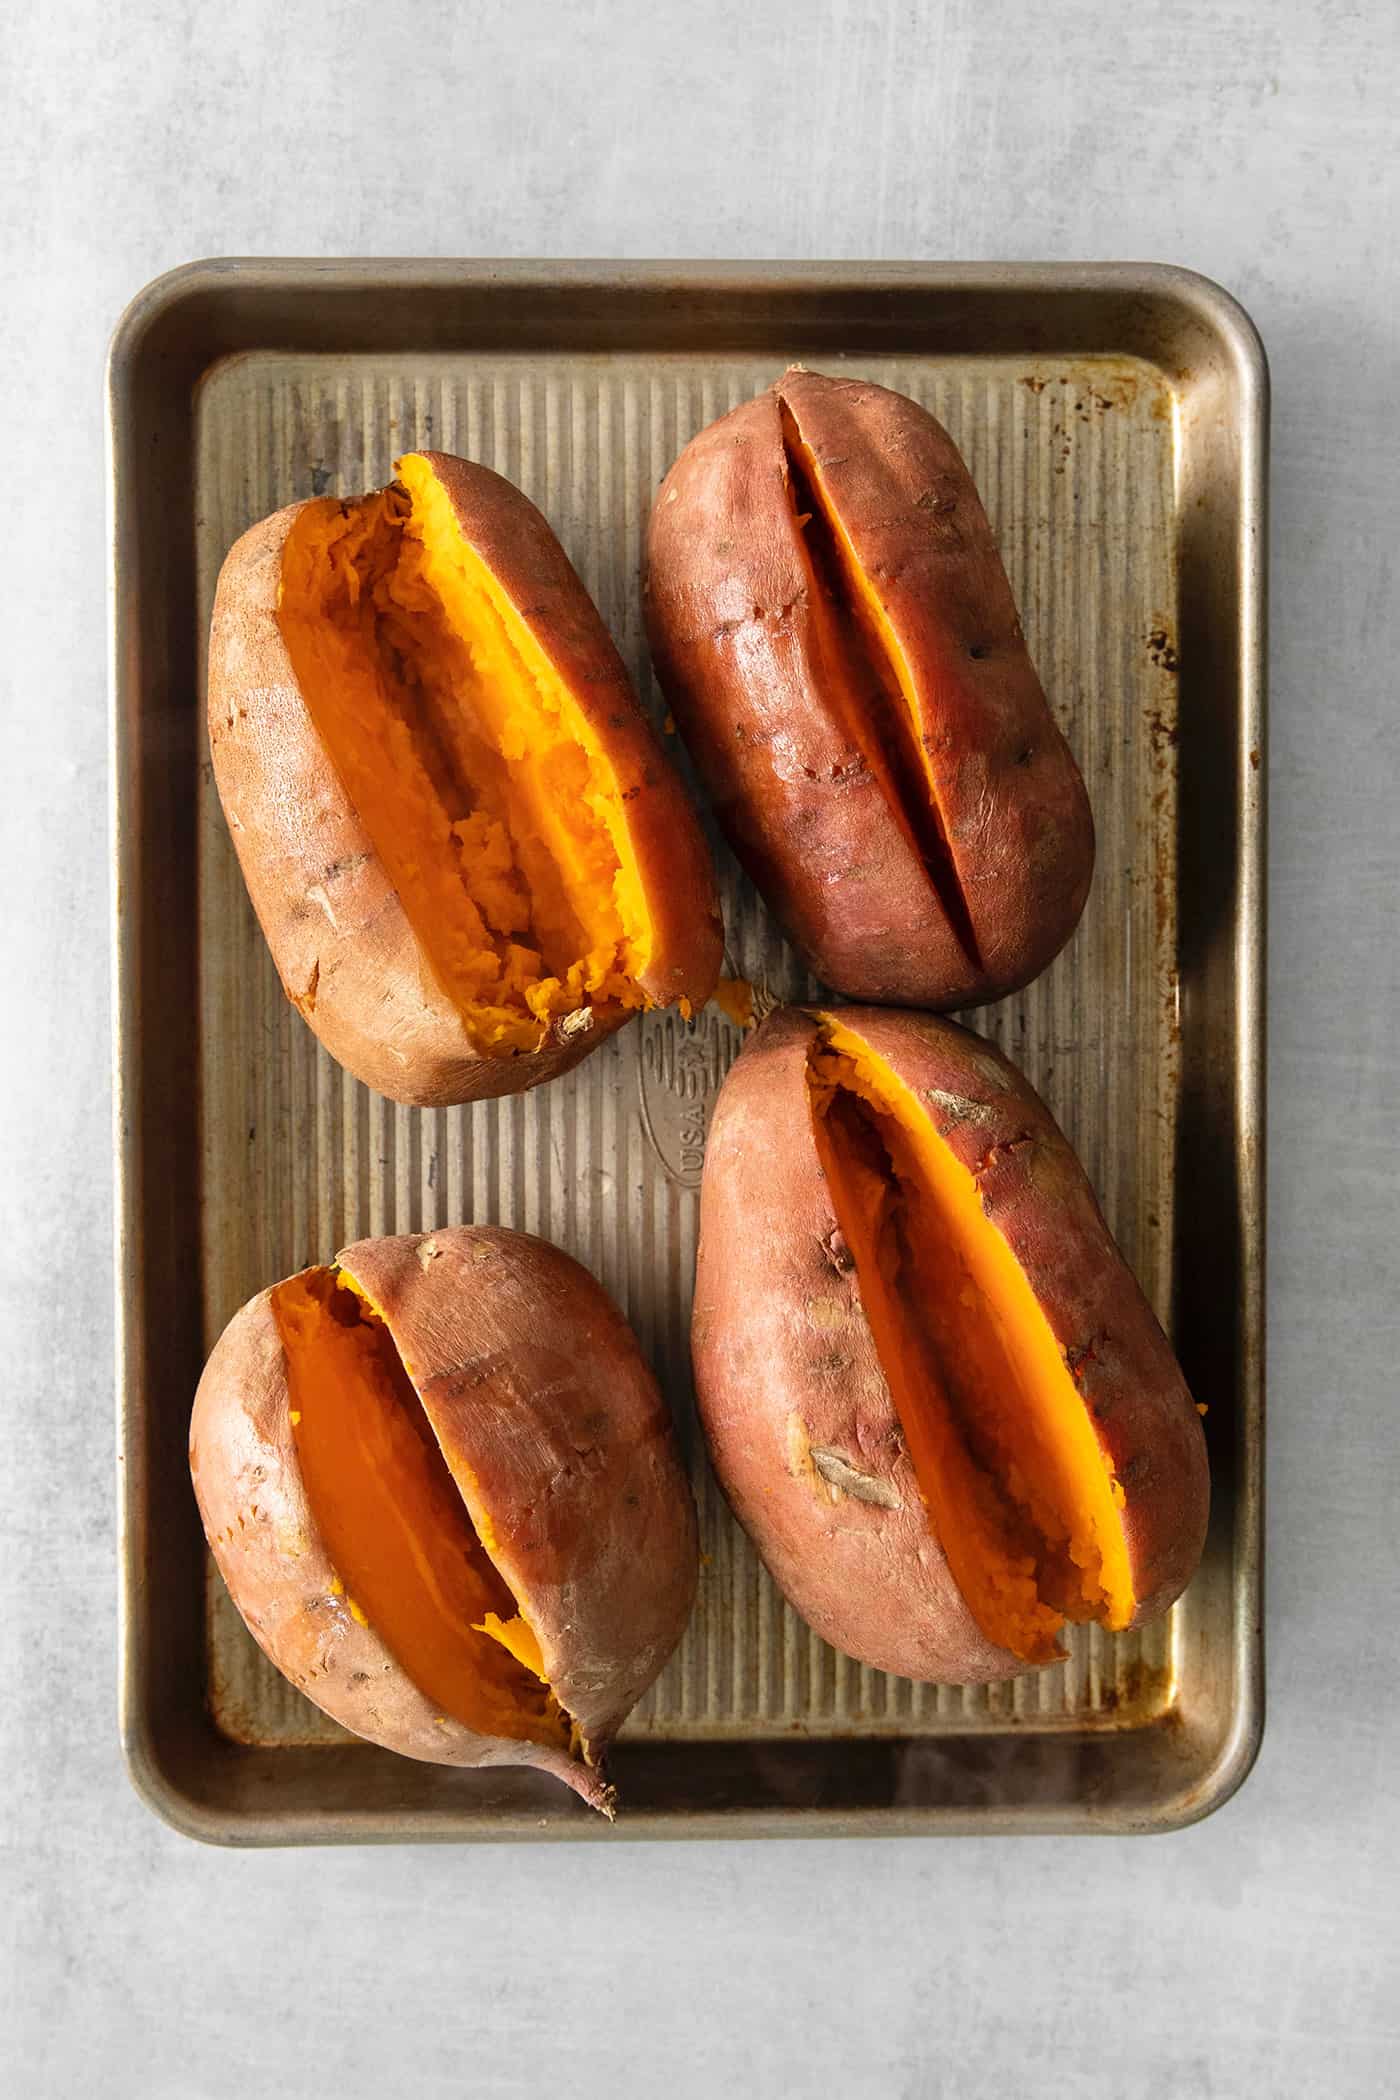 Four cooked sweet potatoes cut open on a baking sheet